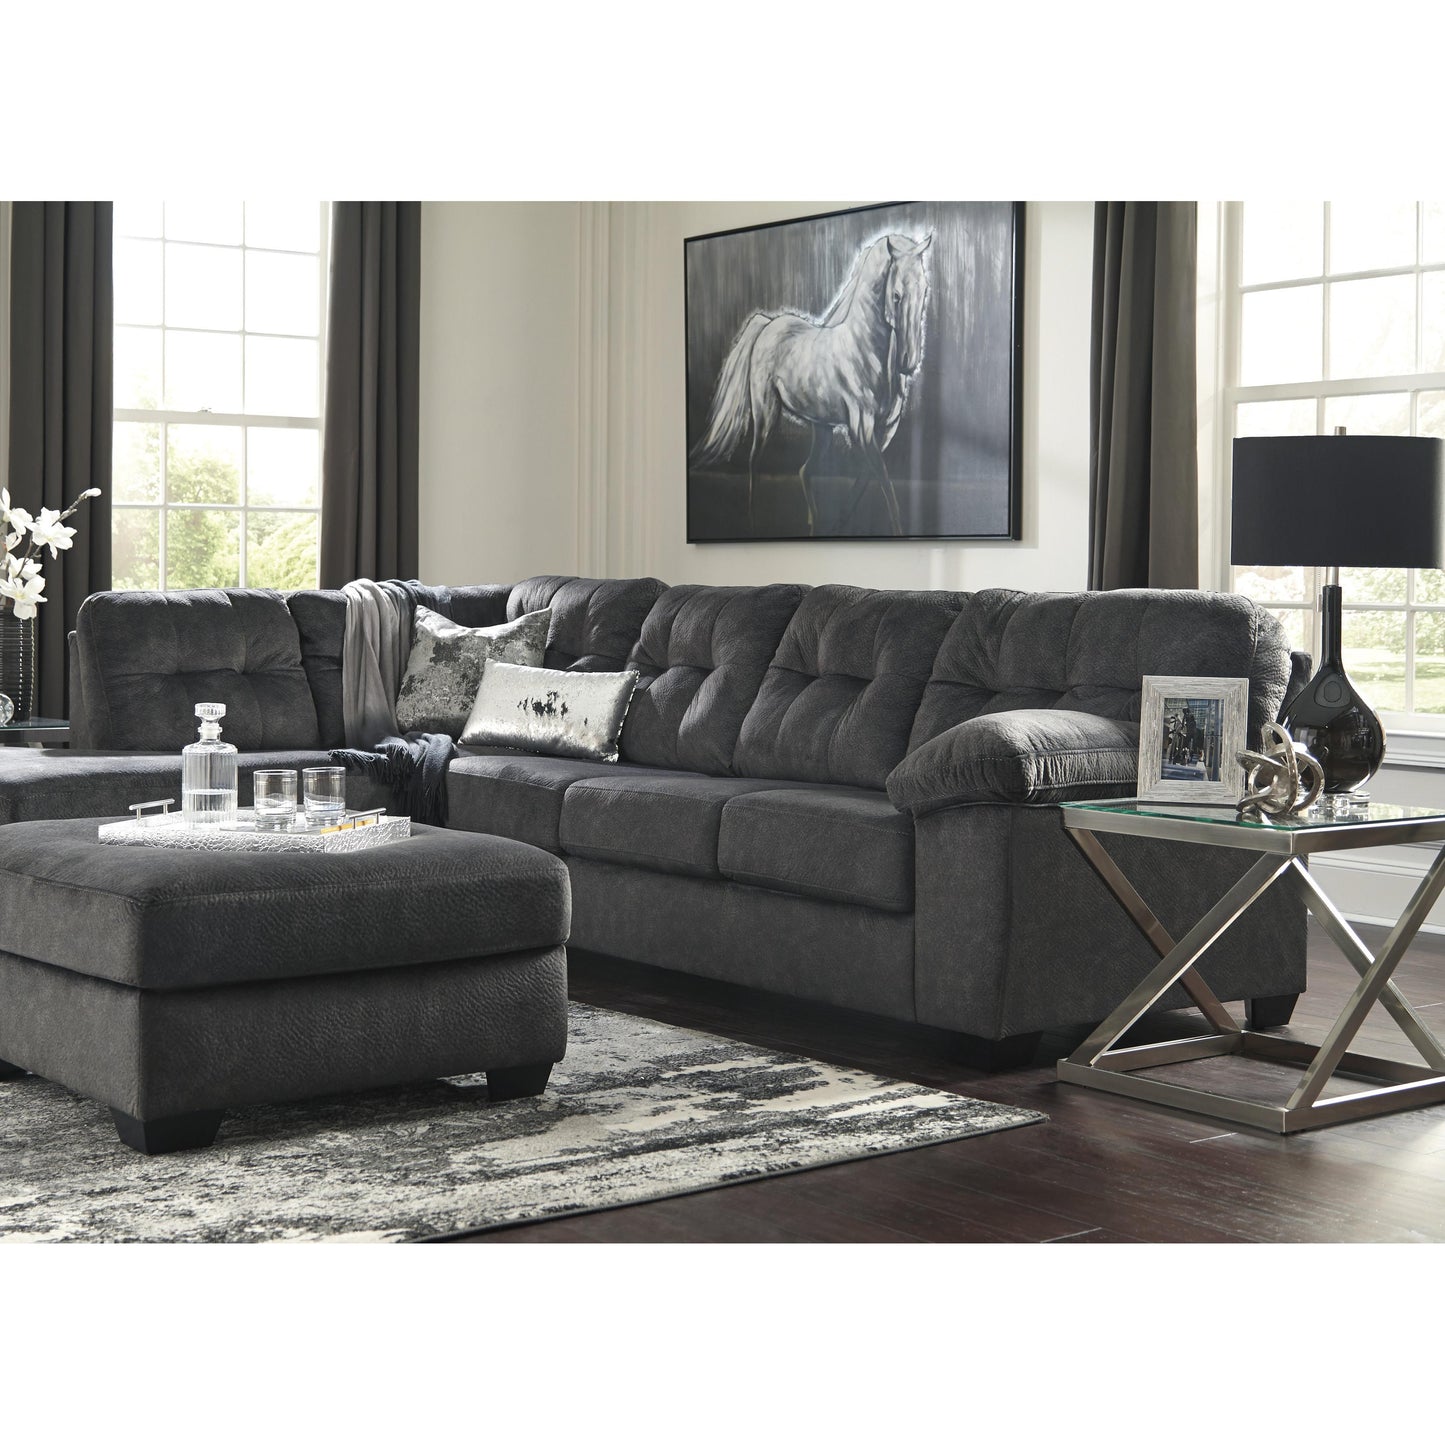 Signature Design by Ashley Accrington Fabric 2 pc Sectional 7050916/7050967